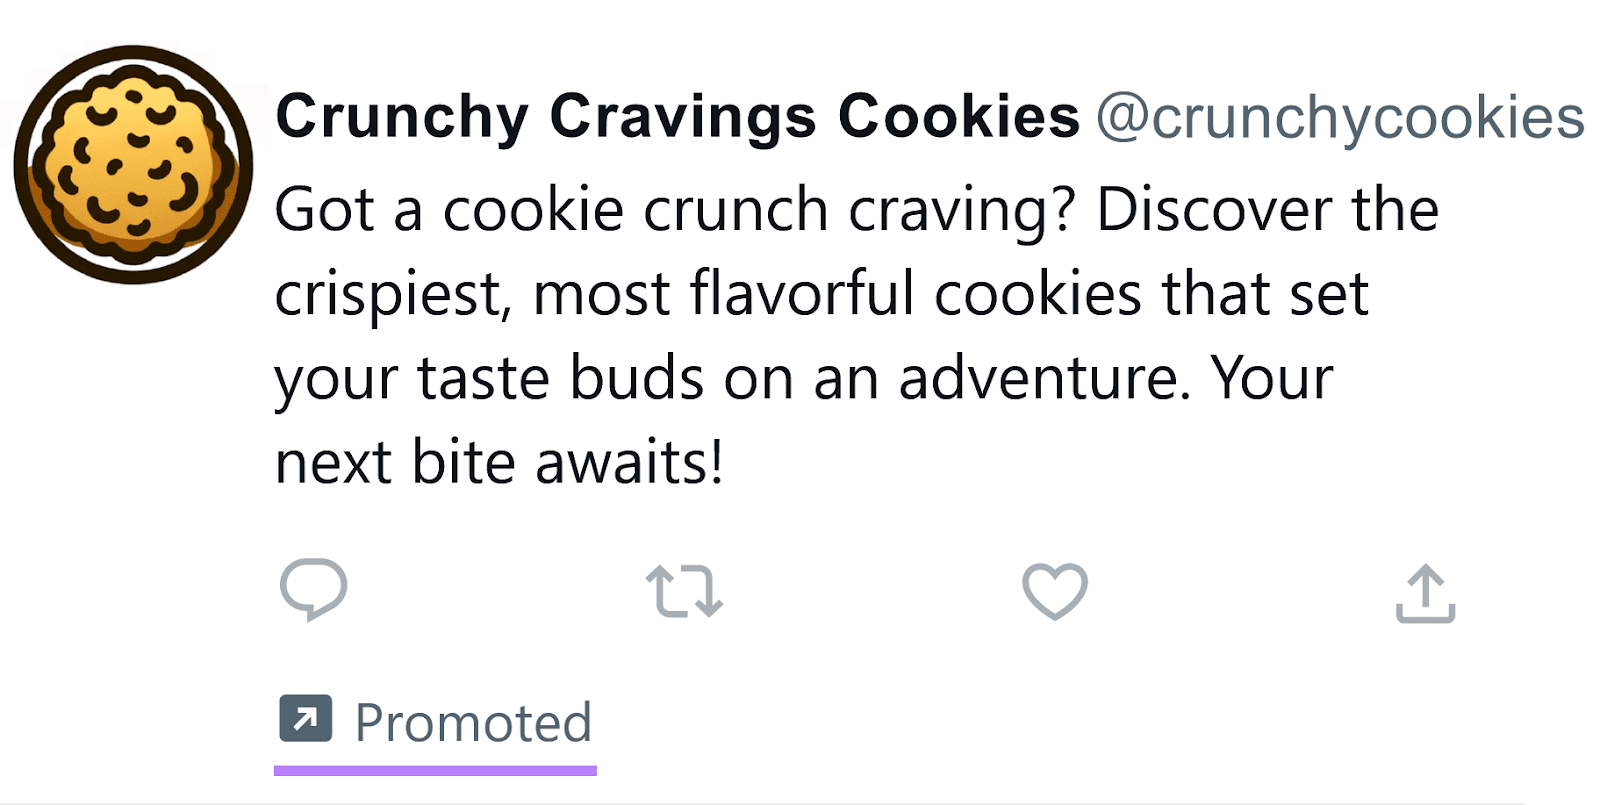 Crunchy Cravings Cookies's post on X, marked as “Promoted”